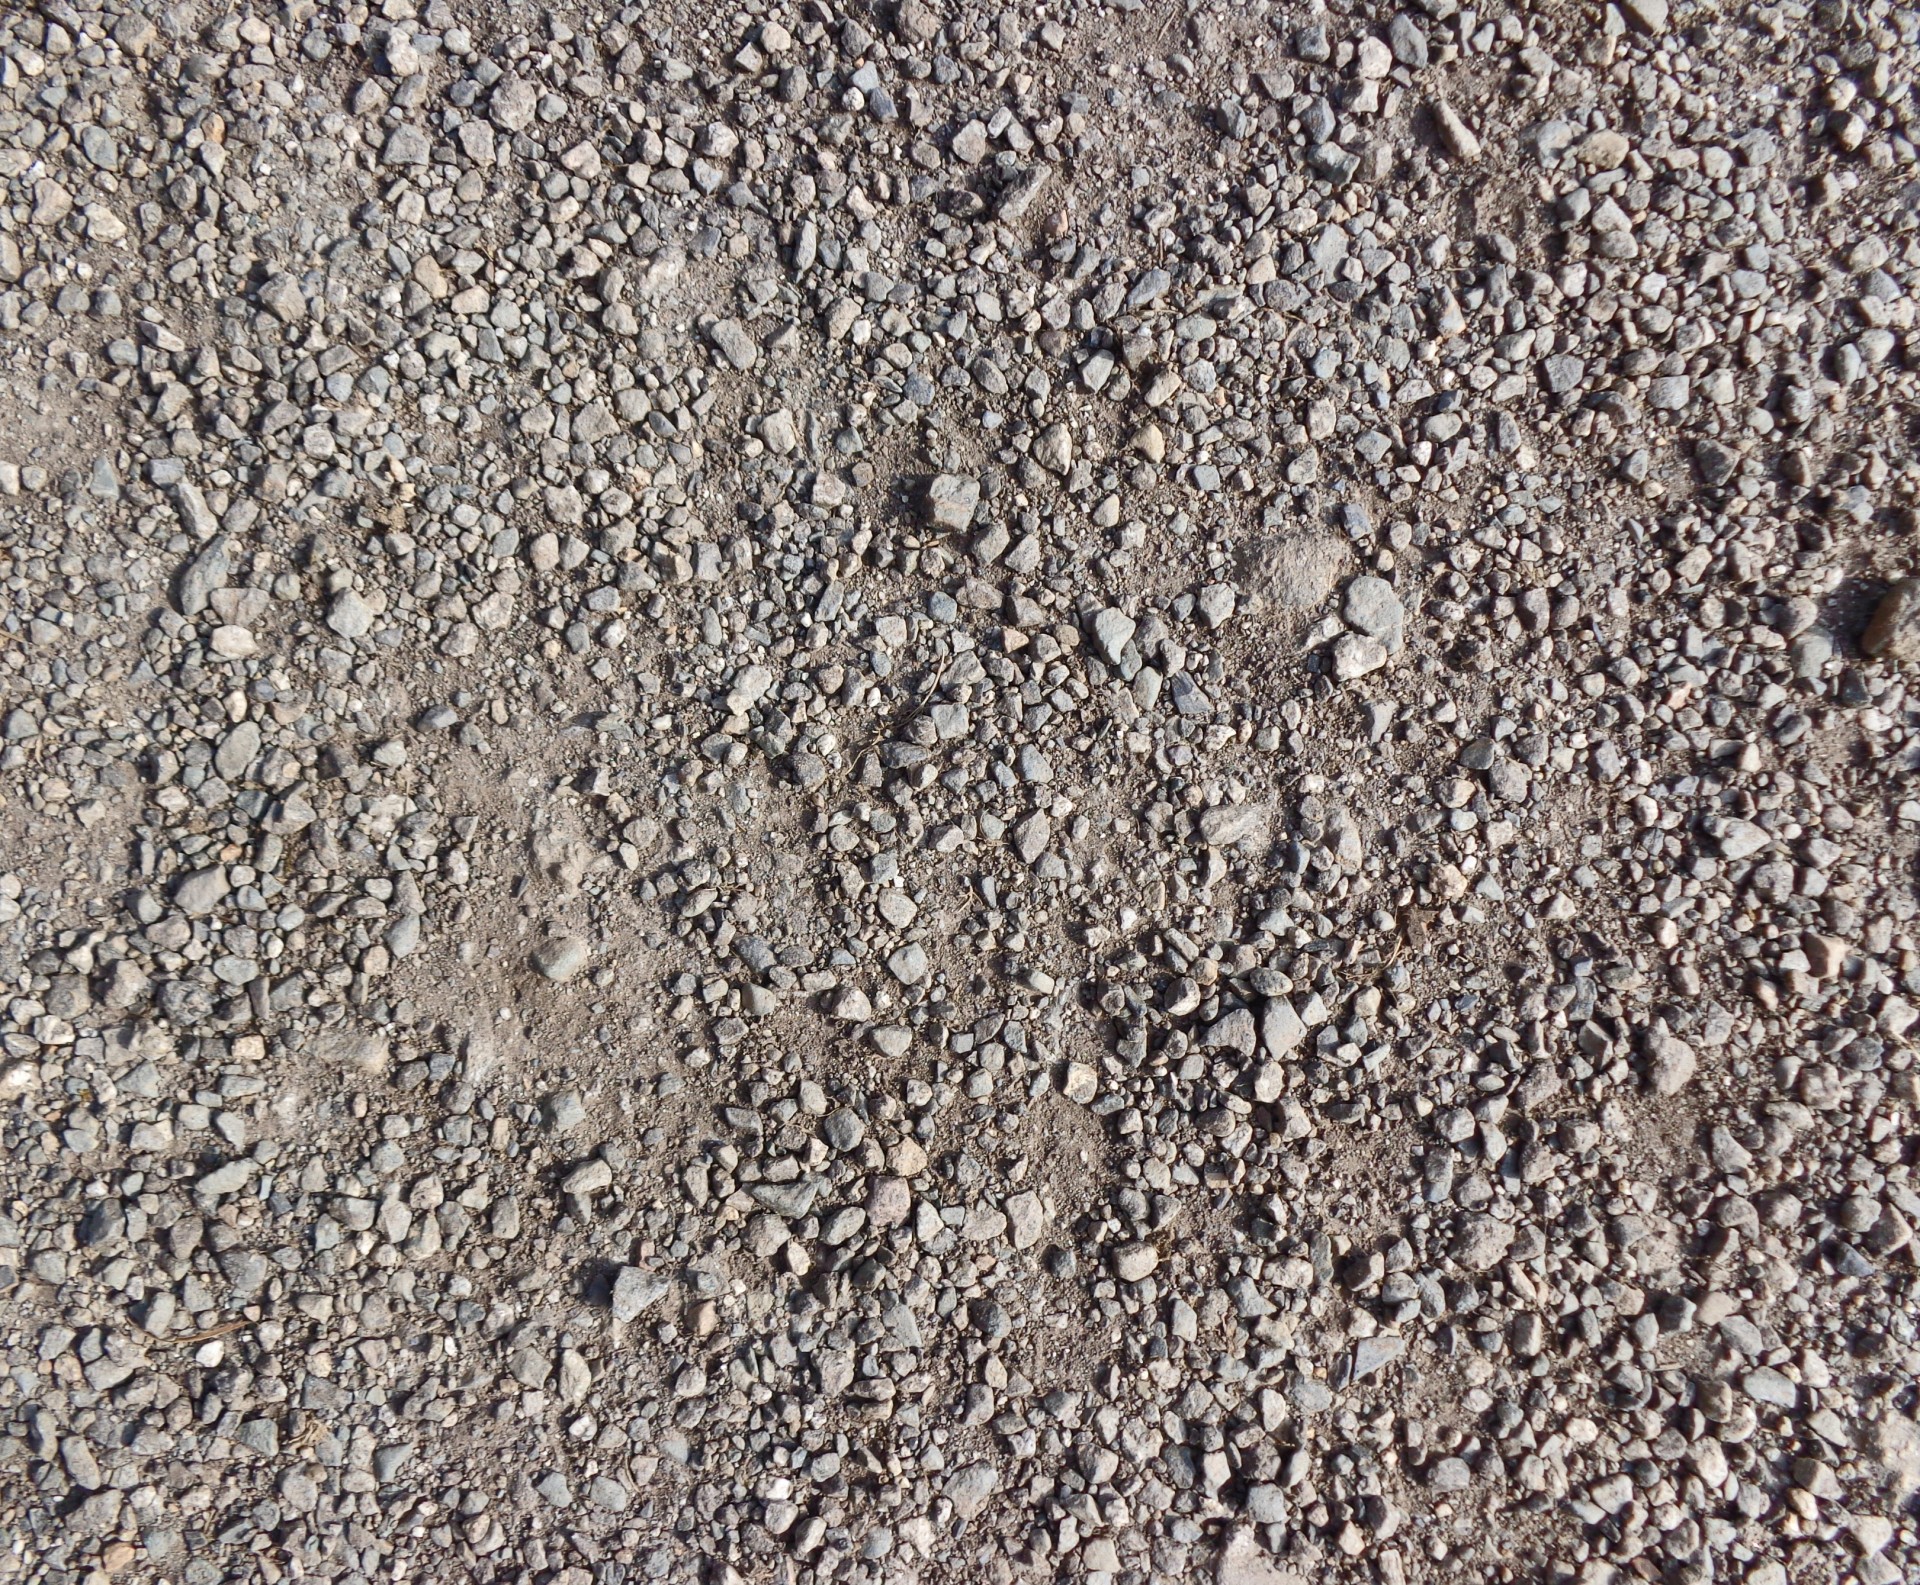 Photograph of a gravel road texture.